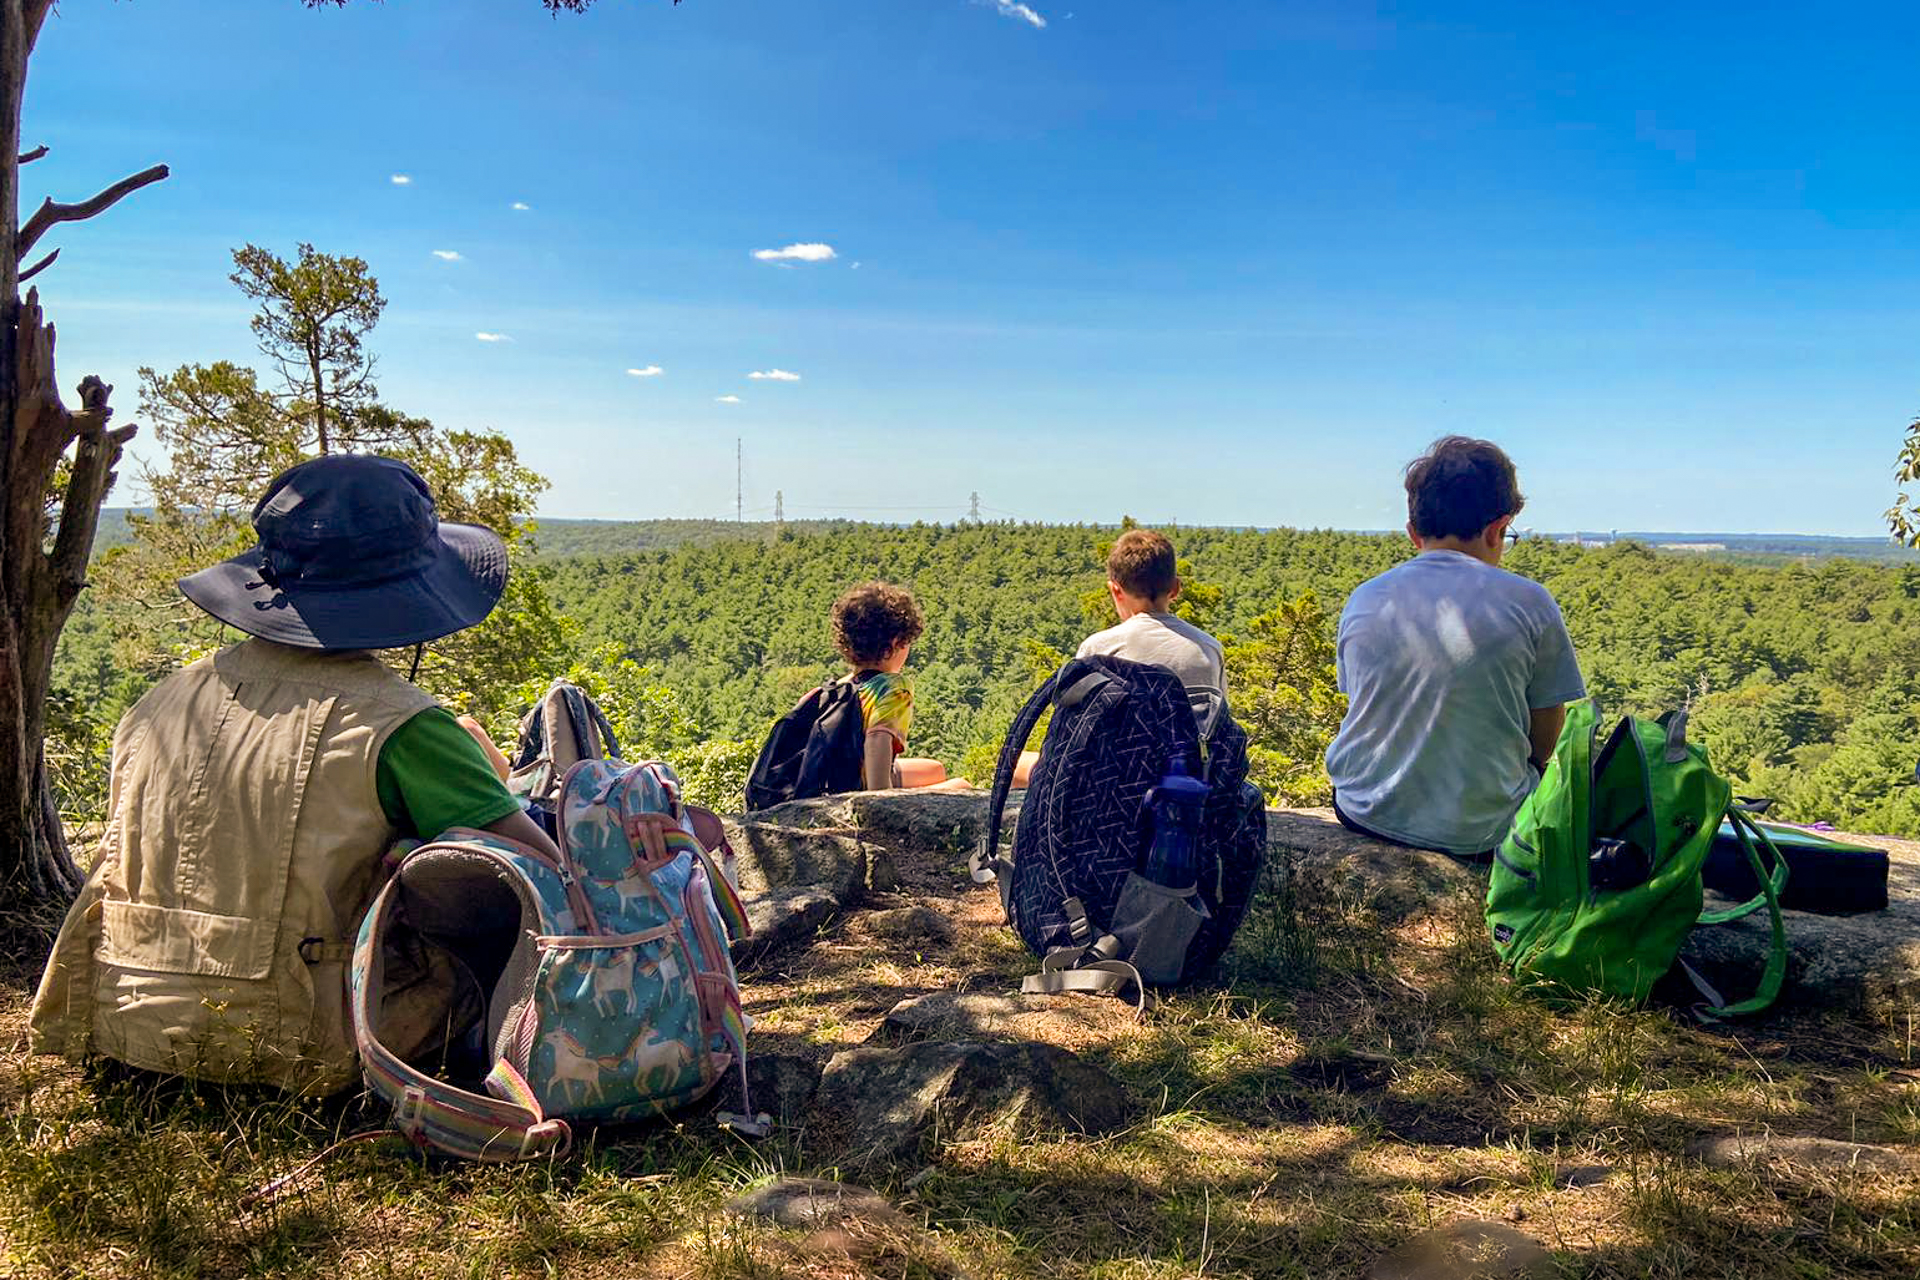 A group of Moose Hill campers taking a break at the Bluff Overlook at Moose Hill Wildlife Sanctuary